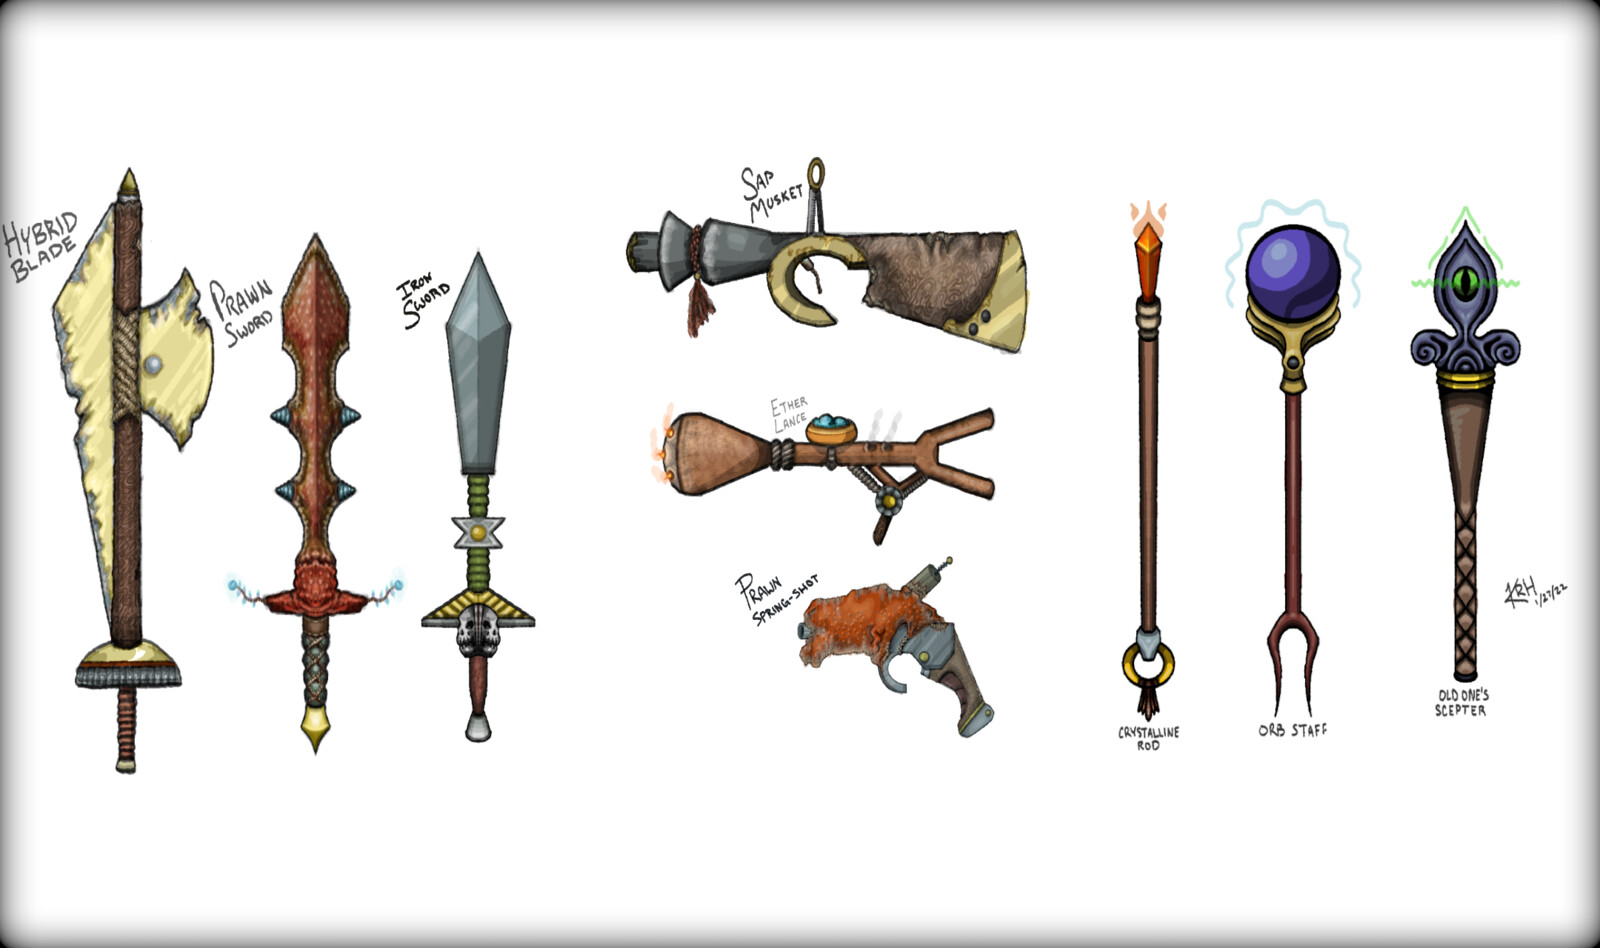 Weapon concepts developed over the course of the project: melee, ranged, and magical.